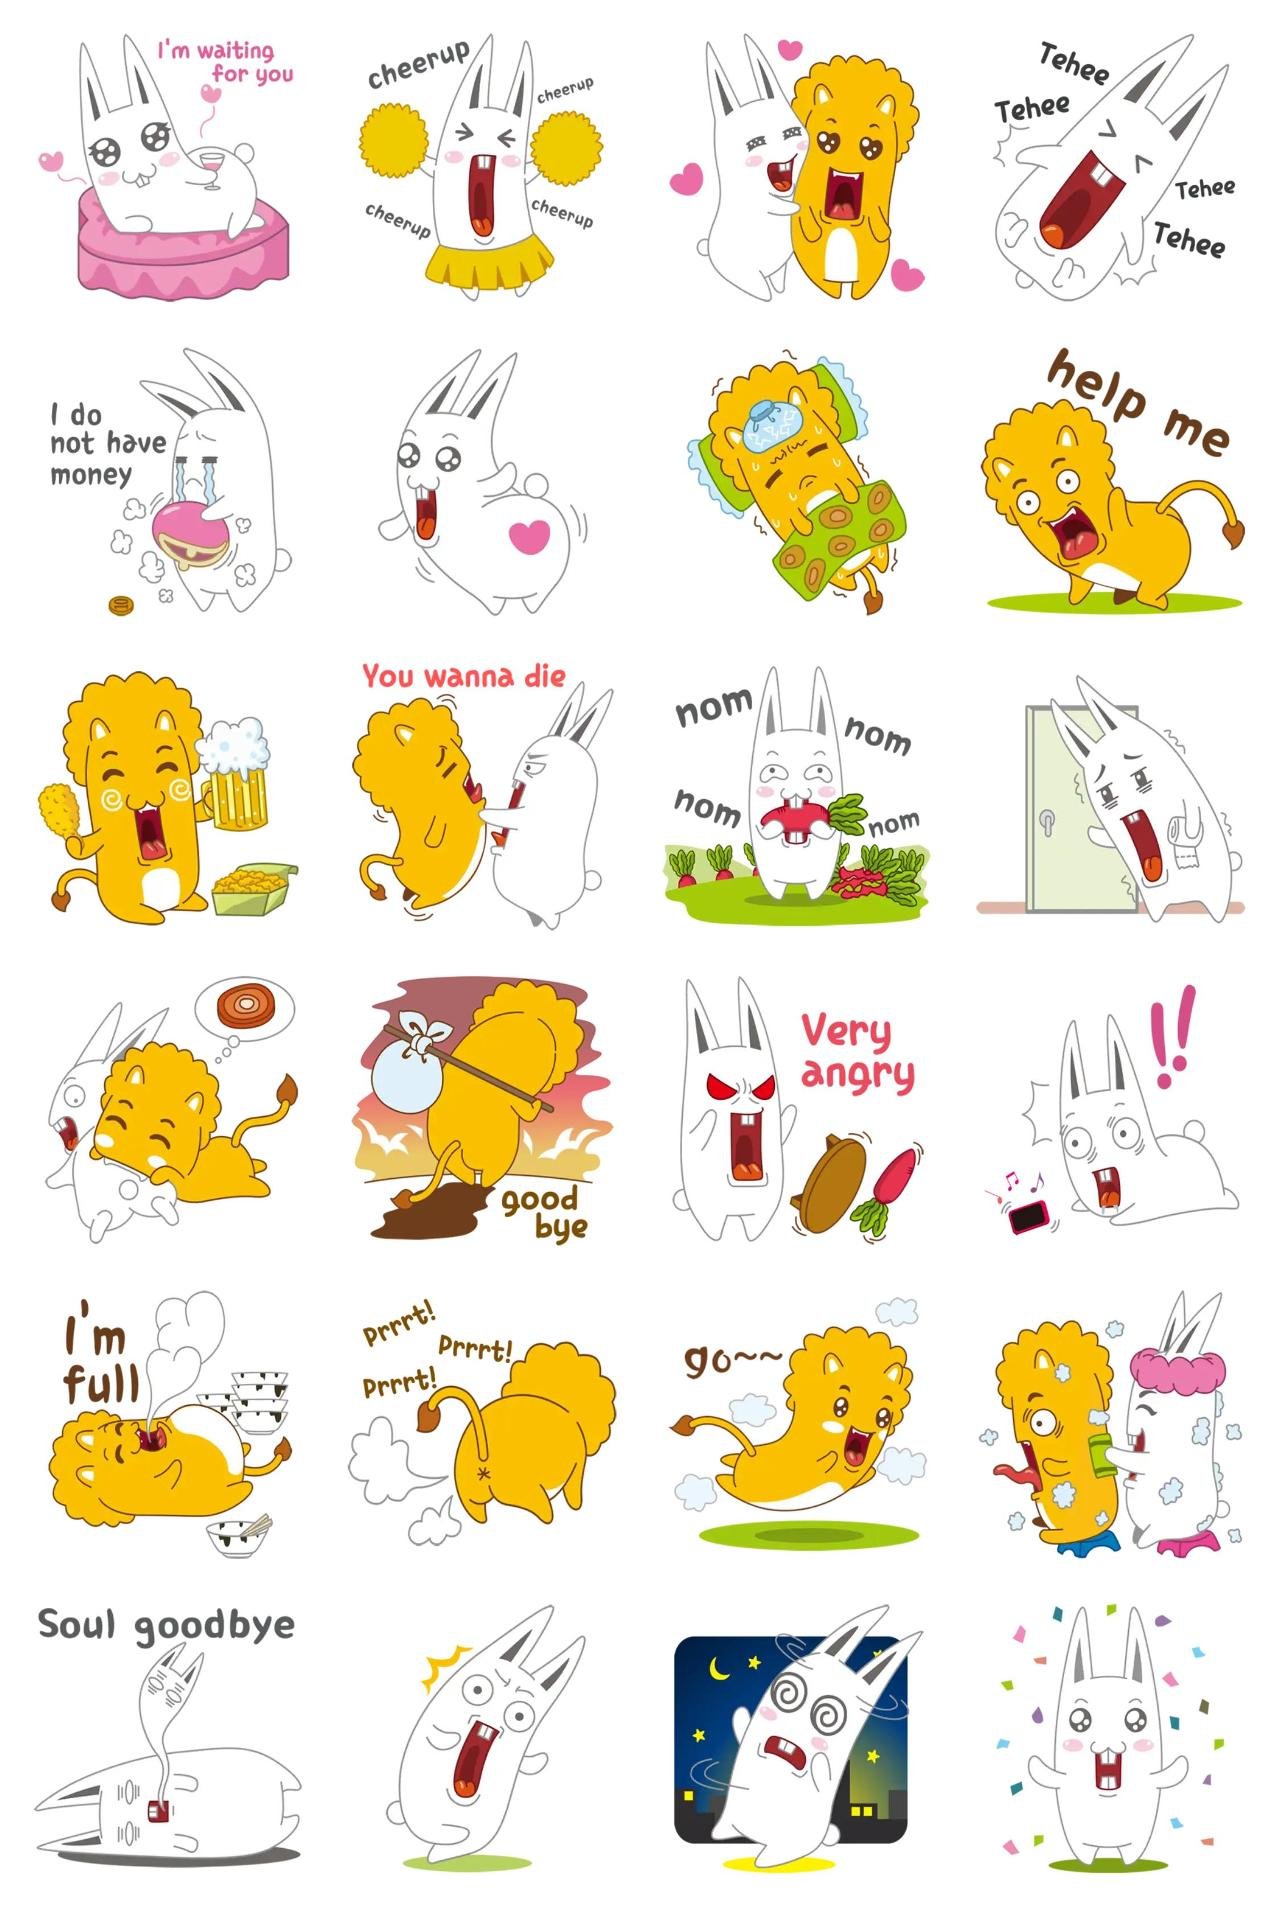 Raontoya Animals,Romance sticker pack for Whatsapp, Telegram, Signal, and others chatting and message apps